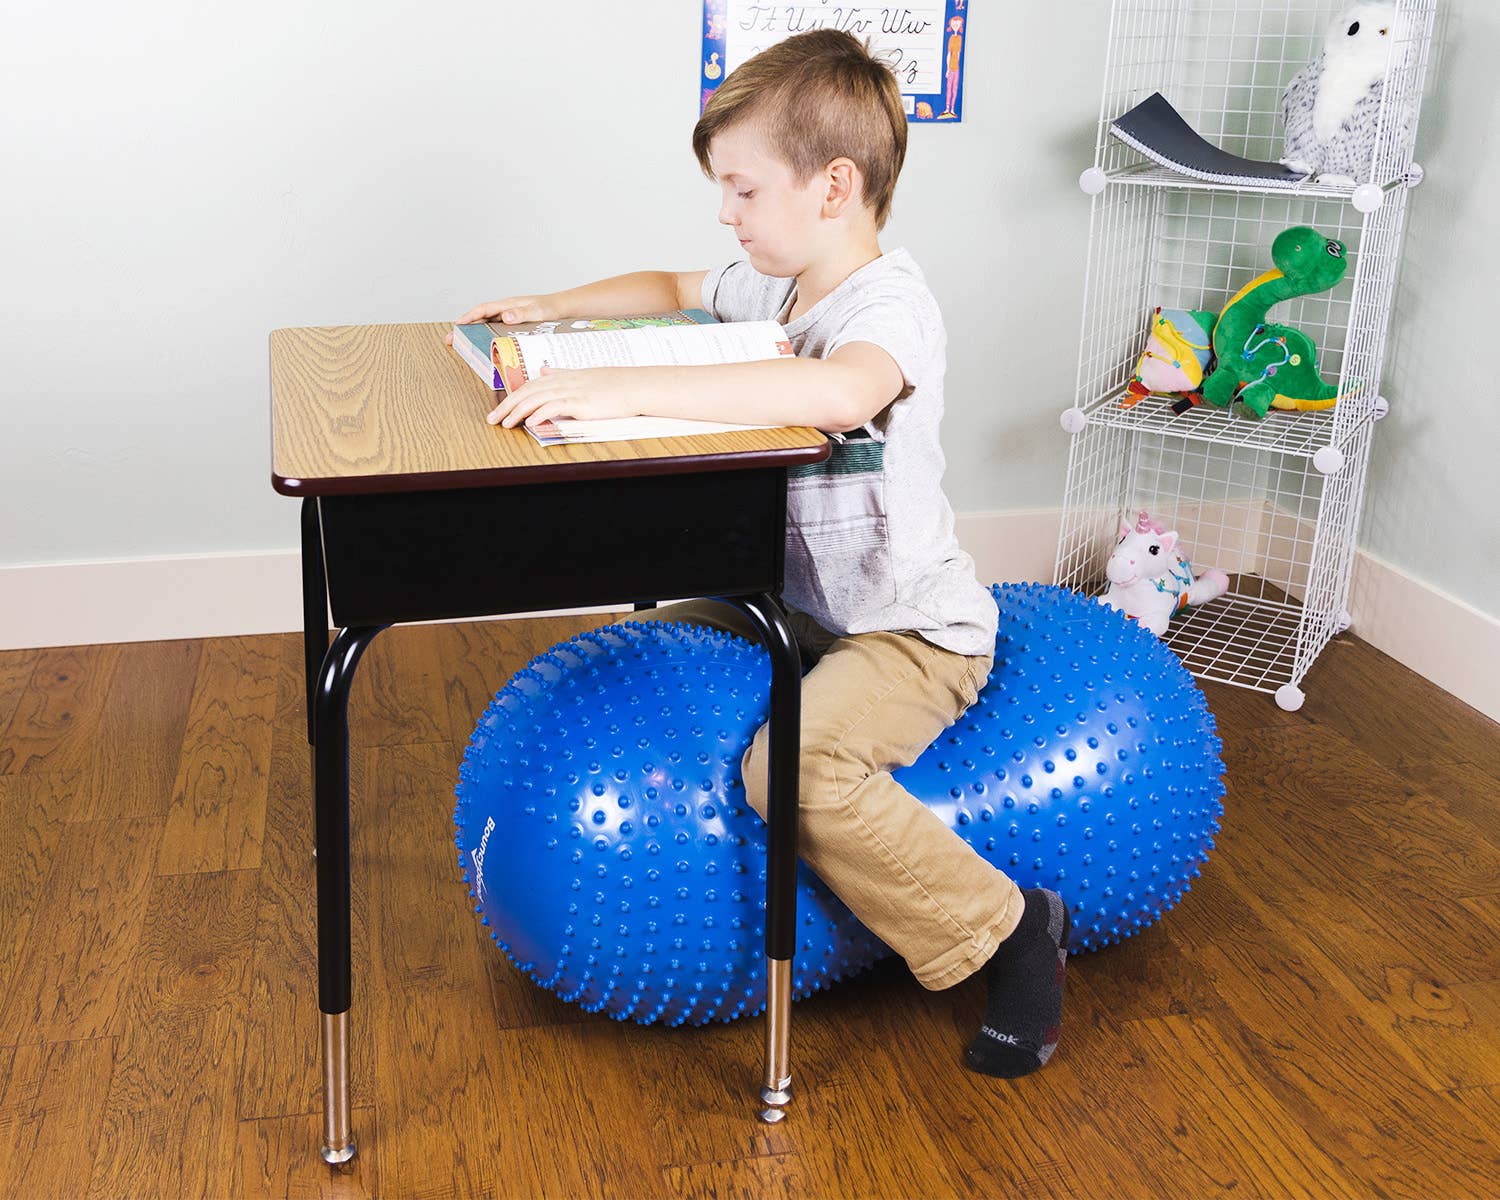 A child with light skin tone and short brown hair sits on a blue Peanut Stability Ball. They are at a desk with a book open.